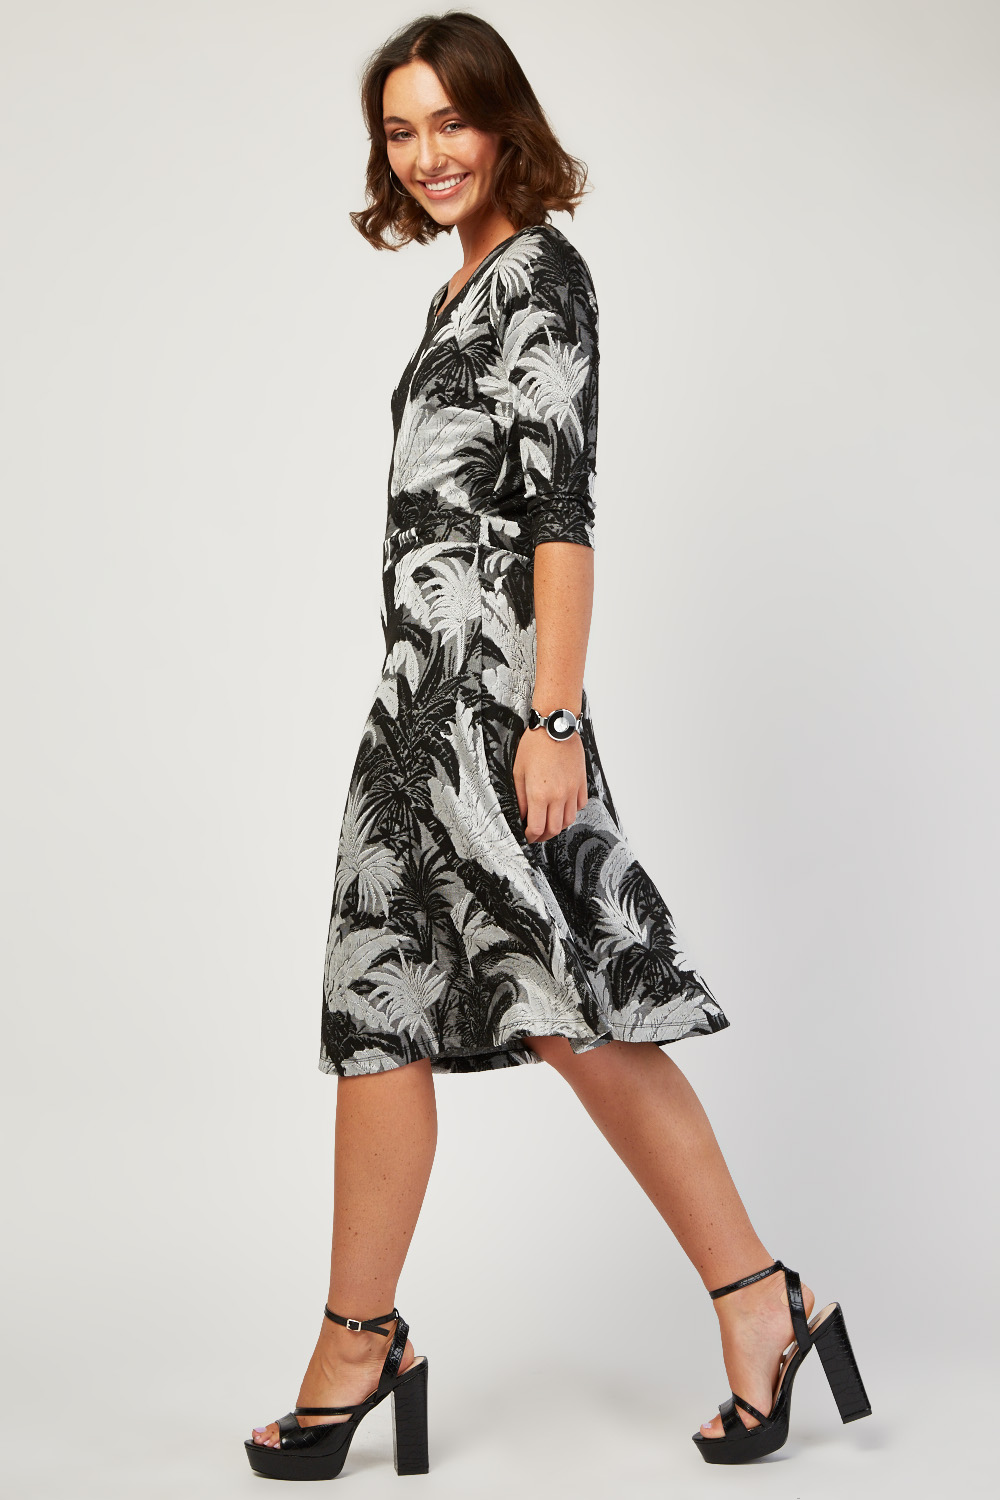 Tropical Palm Tree Embroidered Dress - Just $7